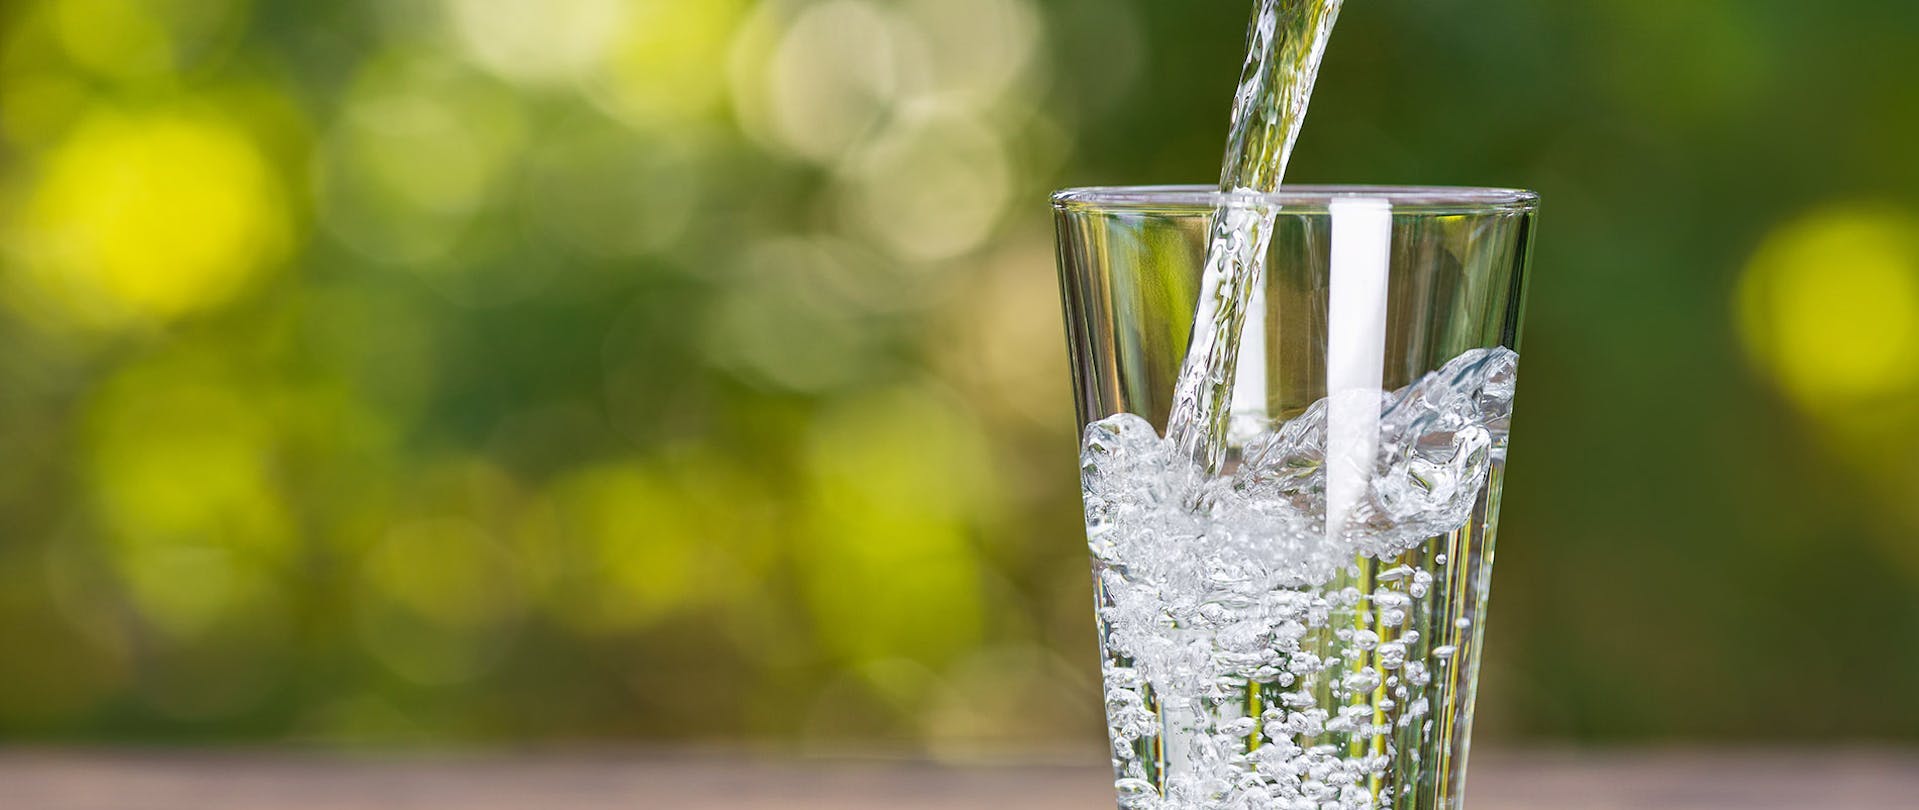 Filtered Water Being Poured Health Benefits to Drinking